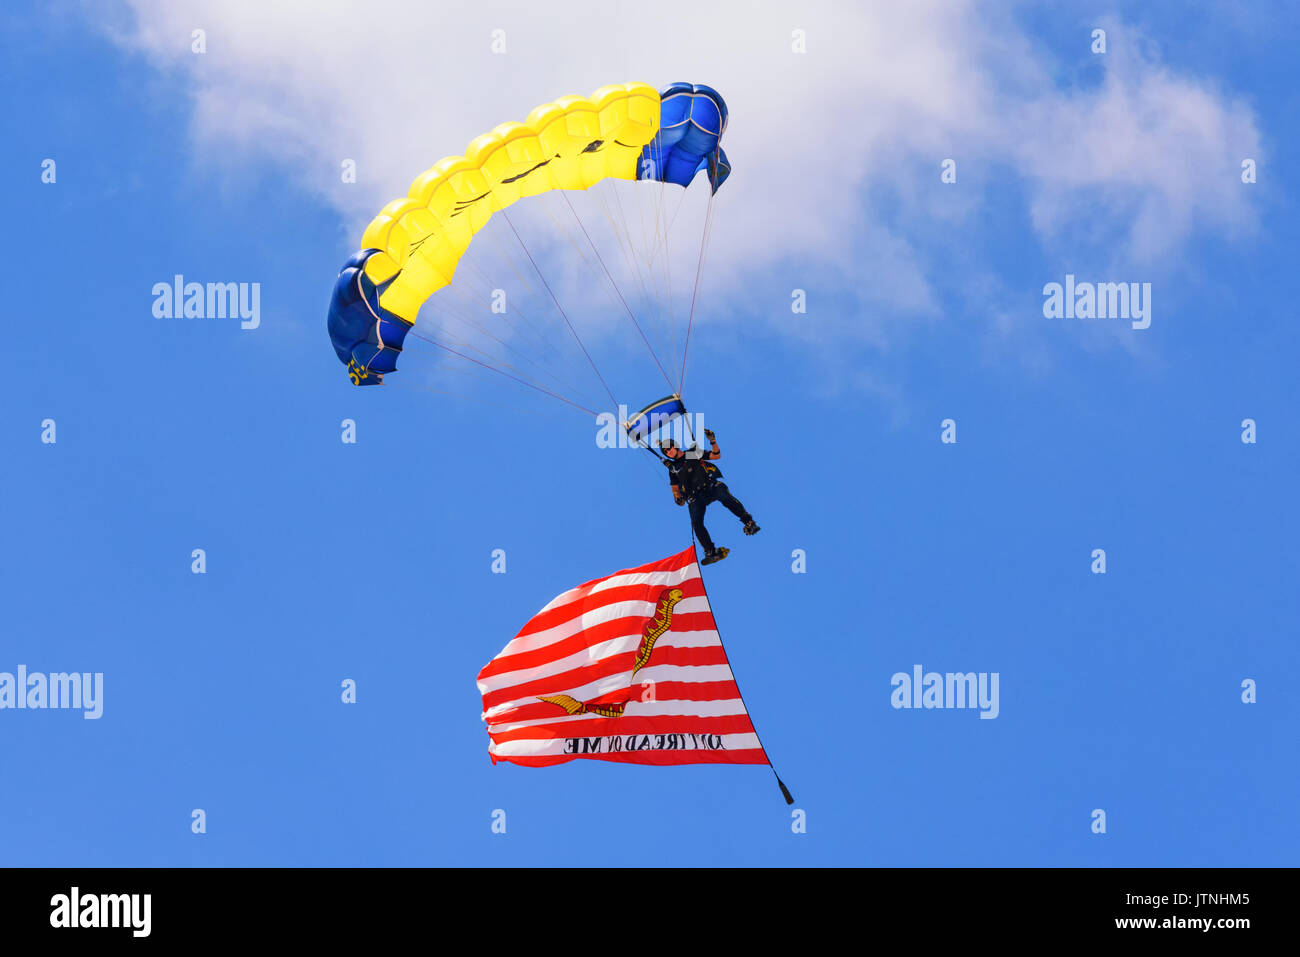 CHEYENNE, WYOMING, USA - JULY 27, 2017: US Navy Leap Frogs team of skydivers opens the annual Frontier Days Rodeo. The Gadsden flag 'DON'T TREAD ON ME Stock Photo